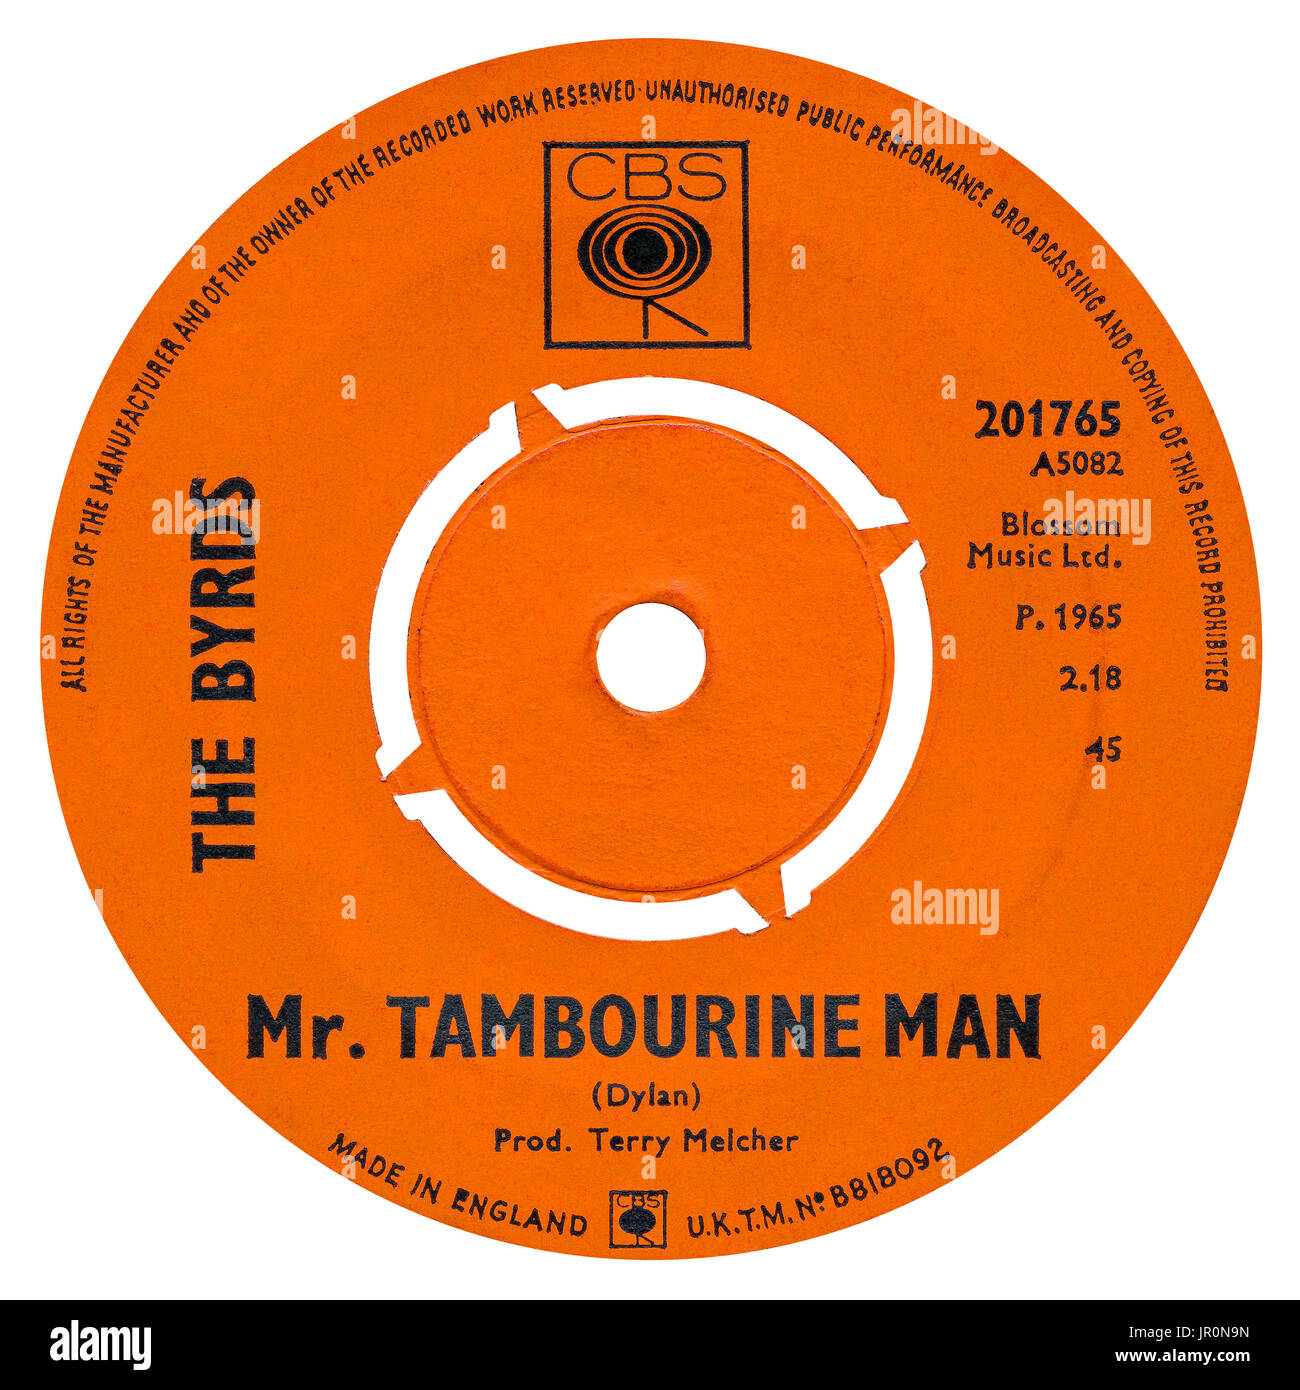 45 RPM 7" UK record label of Mr. Tambourine Man by The Byrds on the CBS  label from 1965 Stock Photo - Alamy